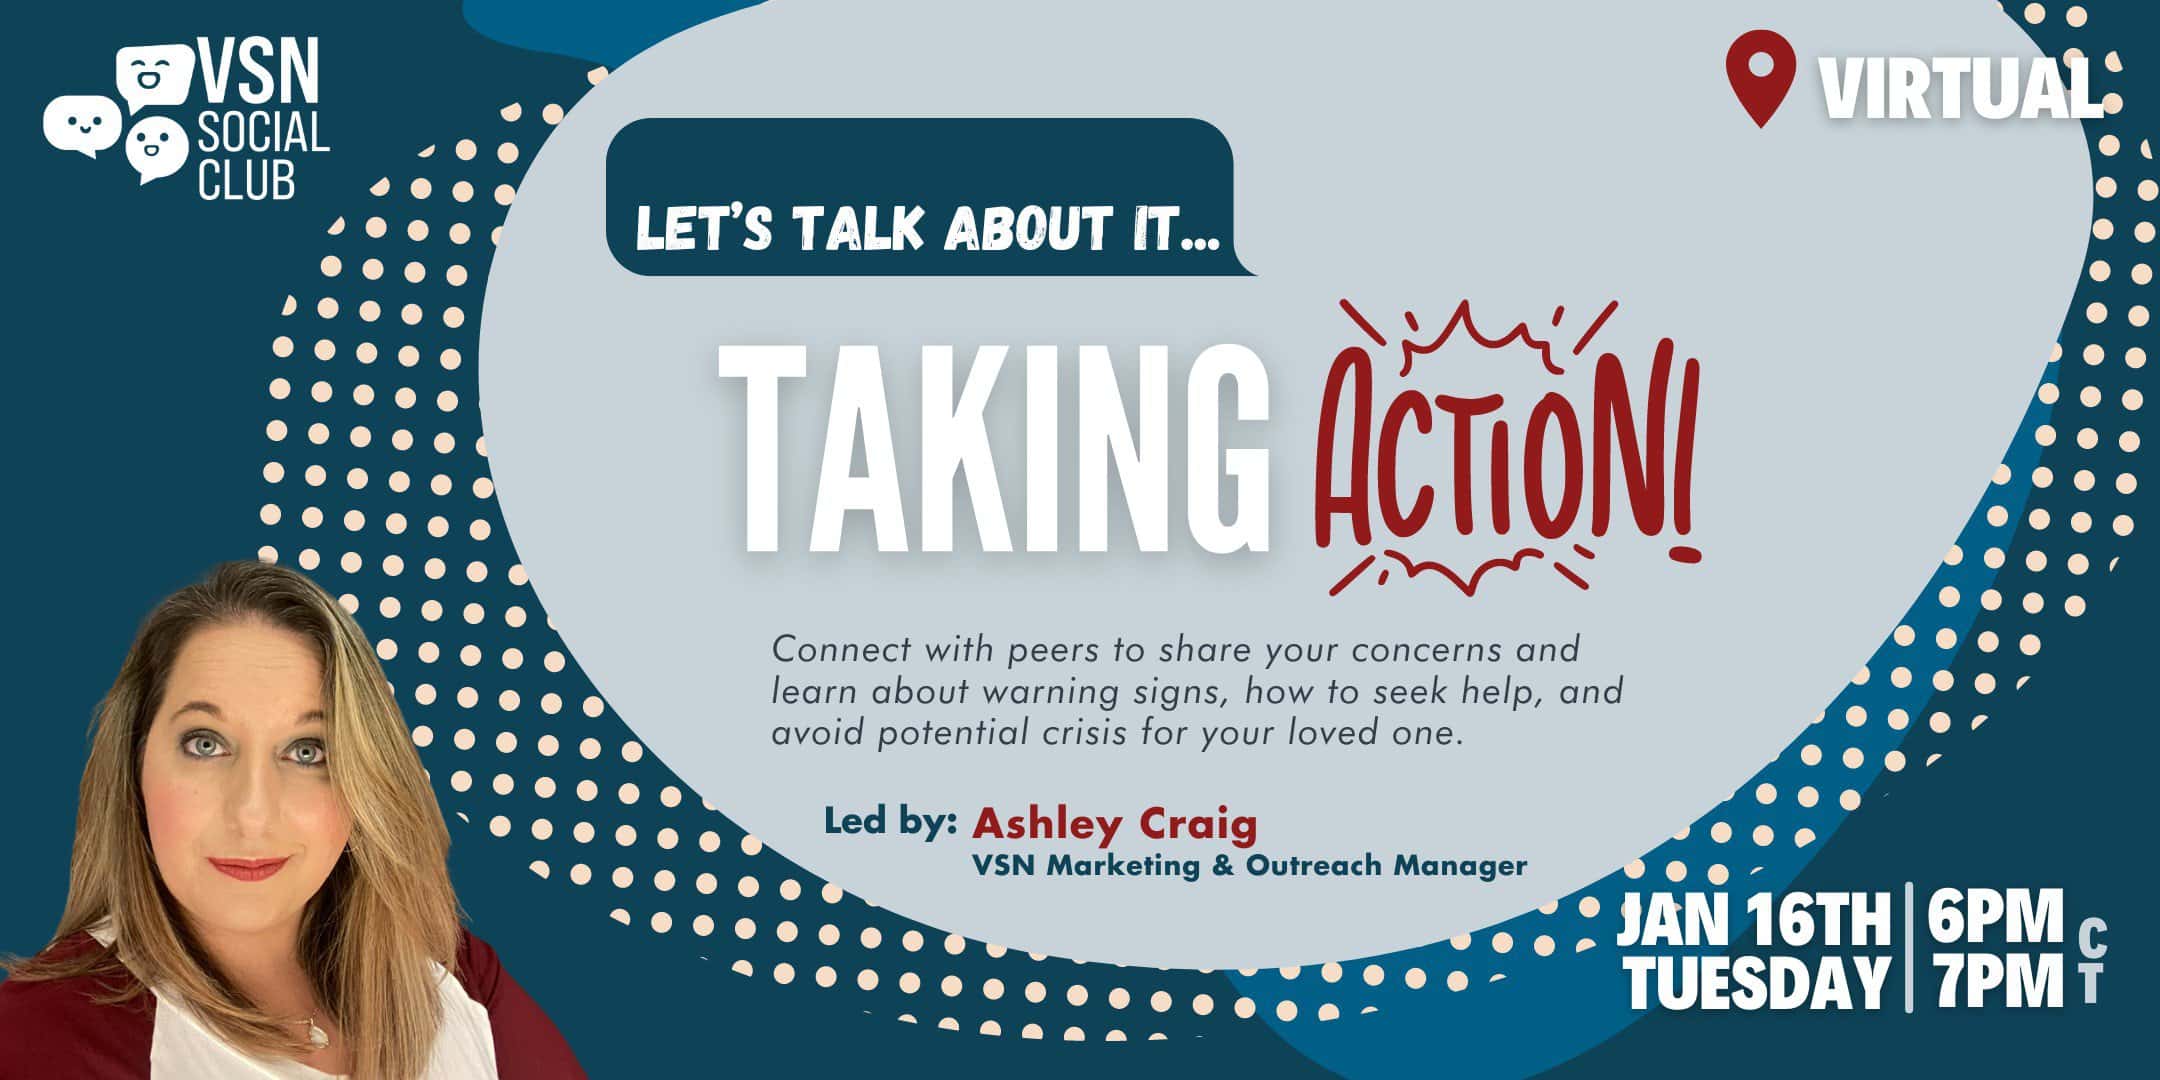 Let's Talk About it: Taking Action